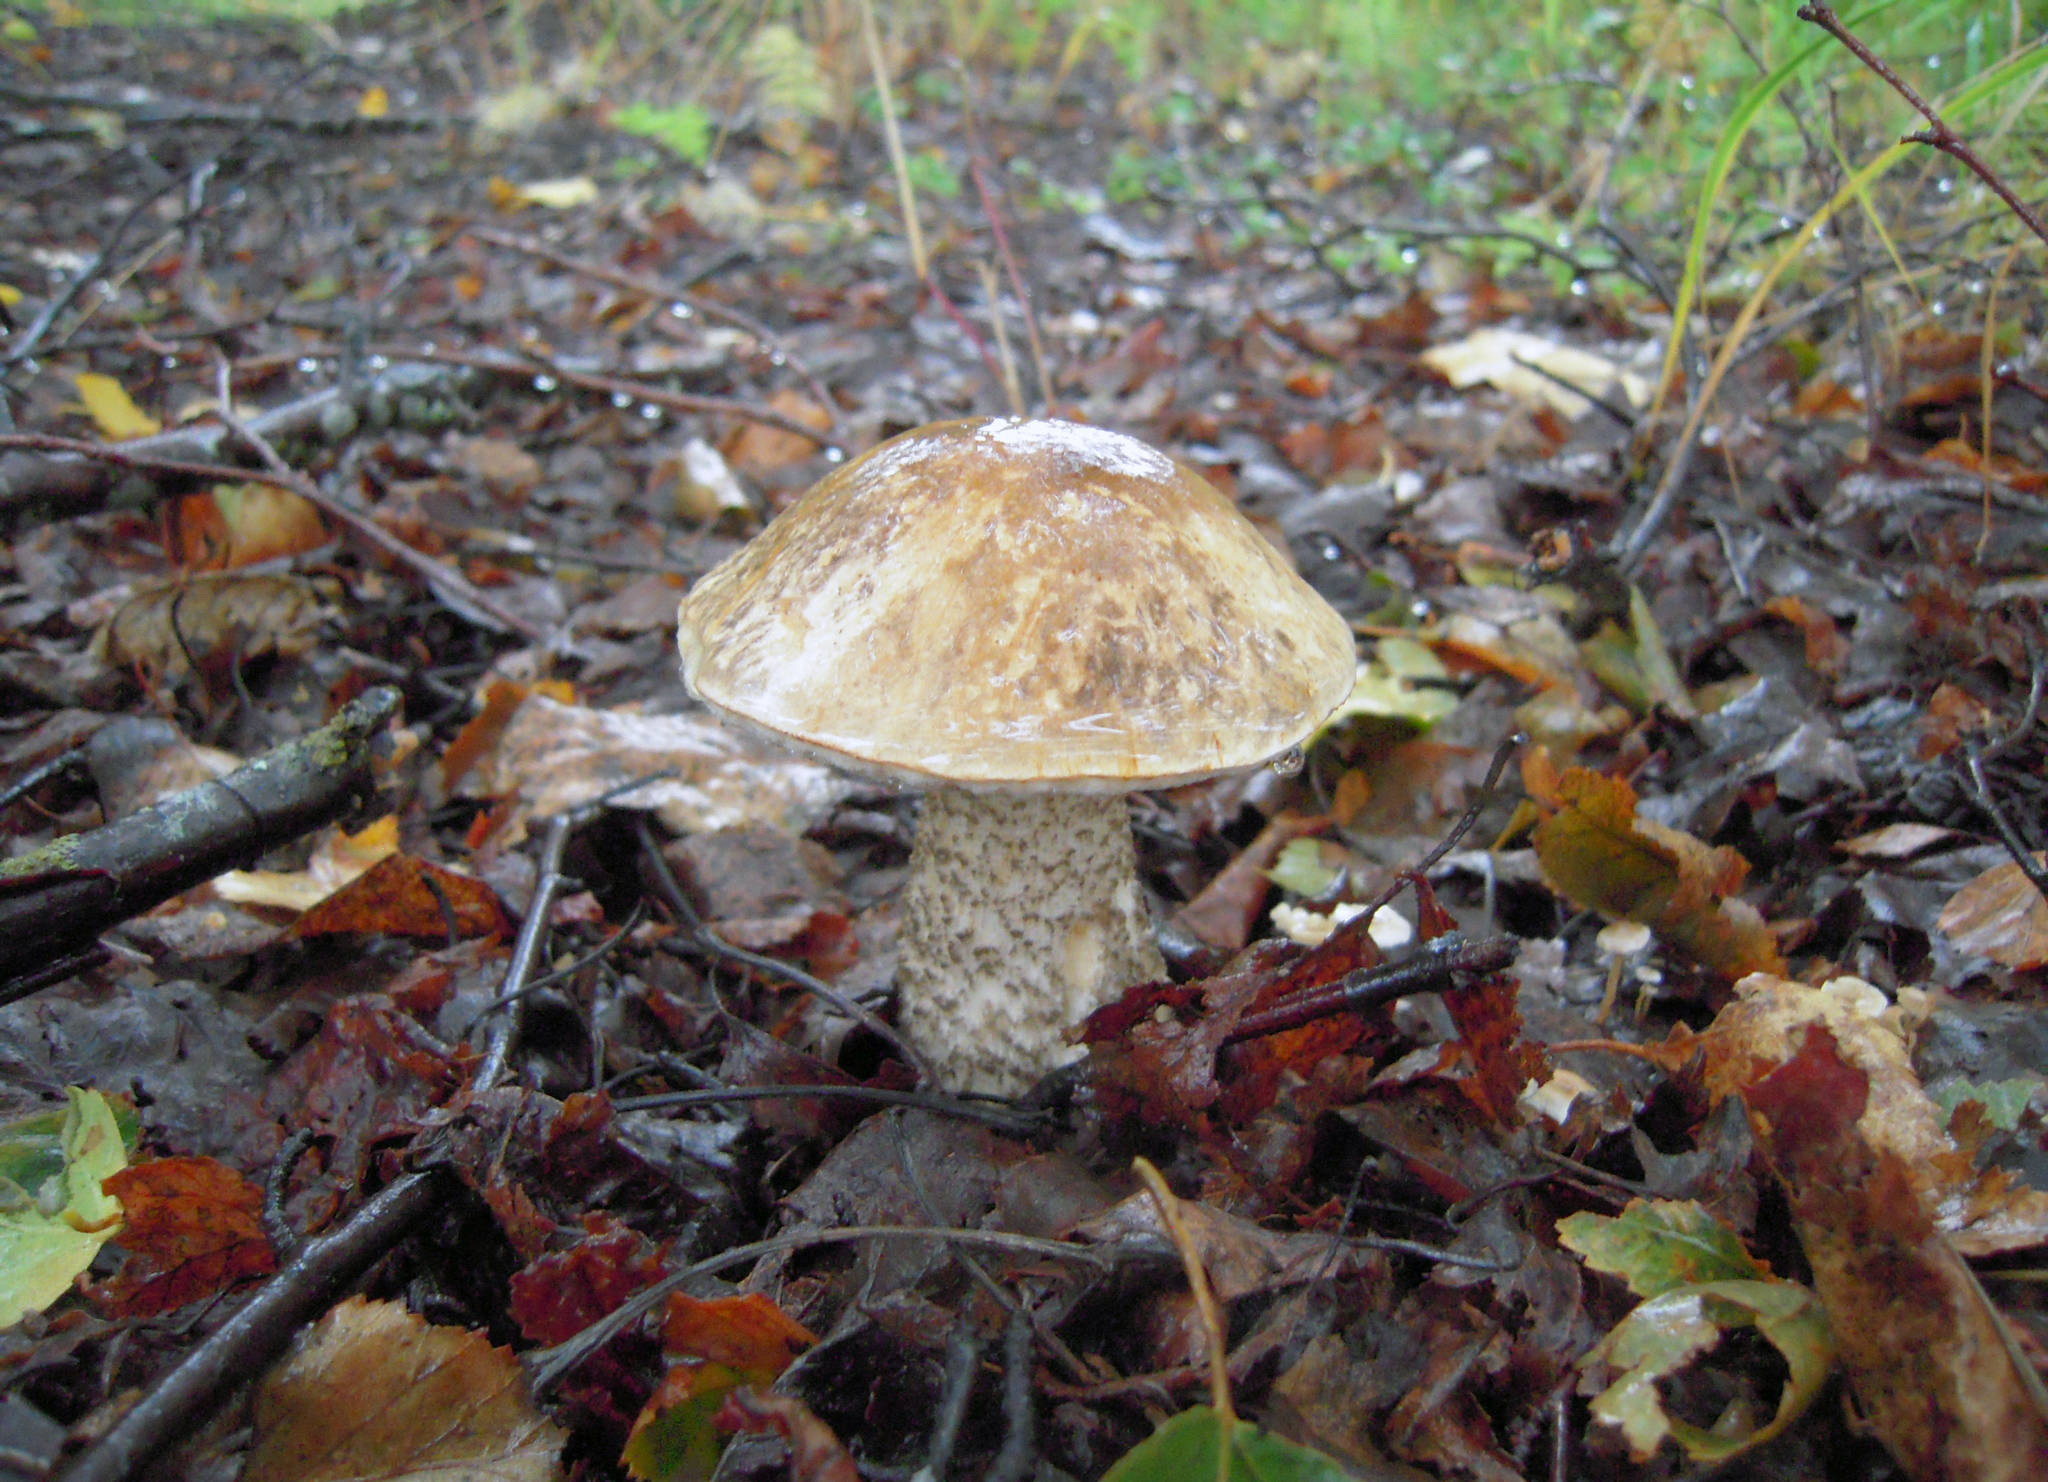 An edible Alaskan scaber-stalk mushroom grows on the Keen Eye Trail on the Kenai National Wildlife Refuge in September 2014. The scaber-stalks form mycorrhizal relationships with roots of trees and shrubs, but the mycorrhizal partners of the Alaskan scaber-stalk are not yet known. (Photo by Matt Bowser/USFWS)